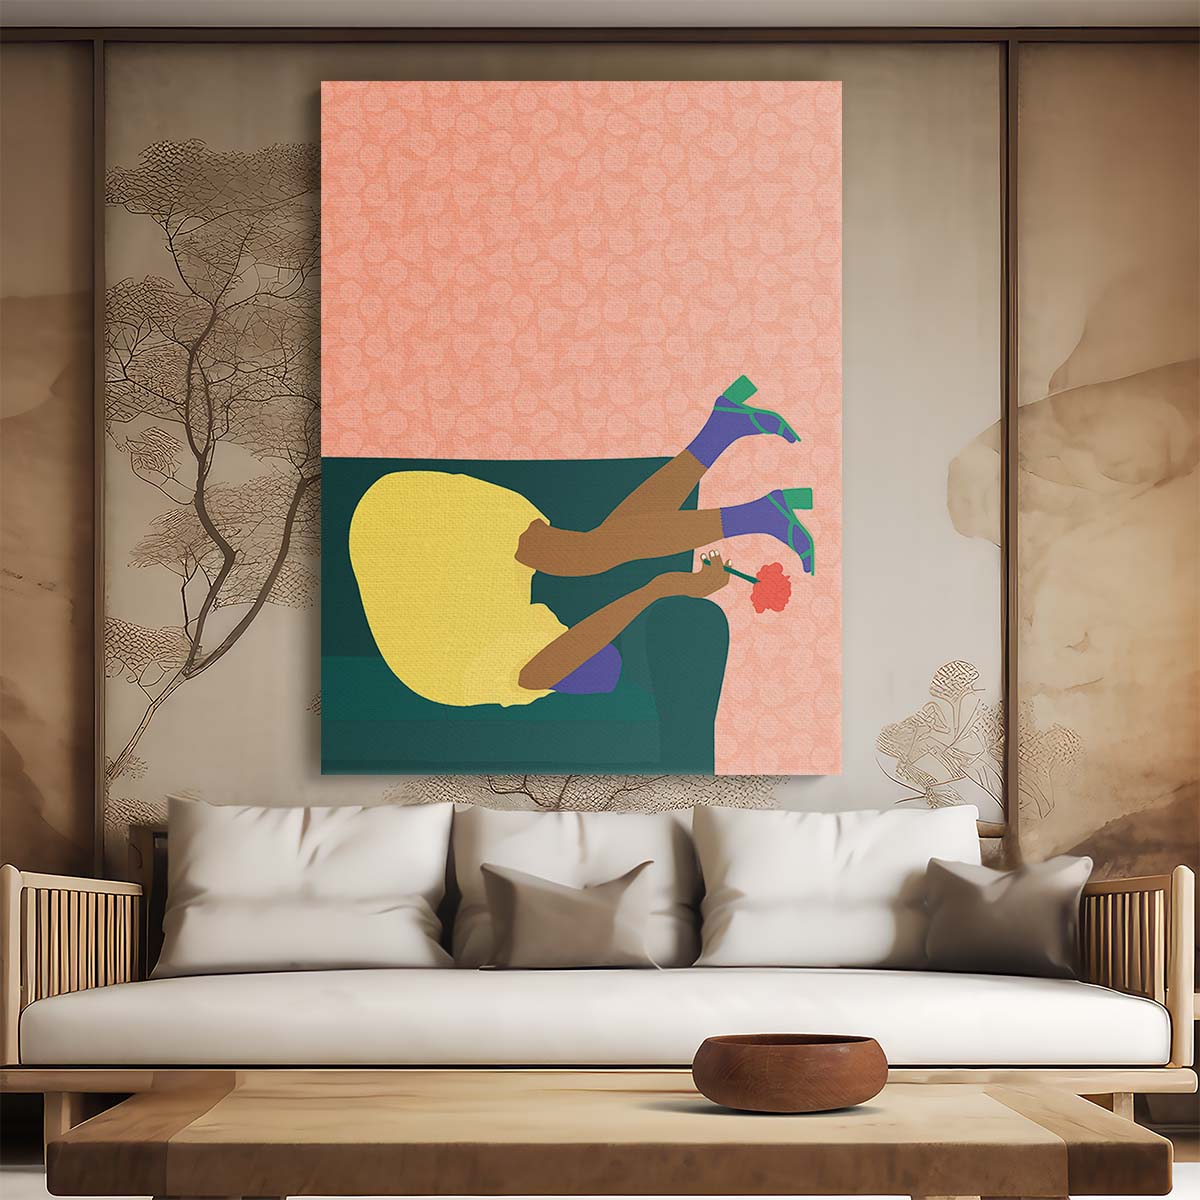 Abstract Floral Woman Illustration with Roses on Sofa Artwork by Luxuriance Designs, made in USA